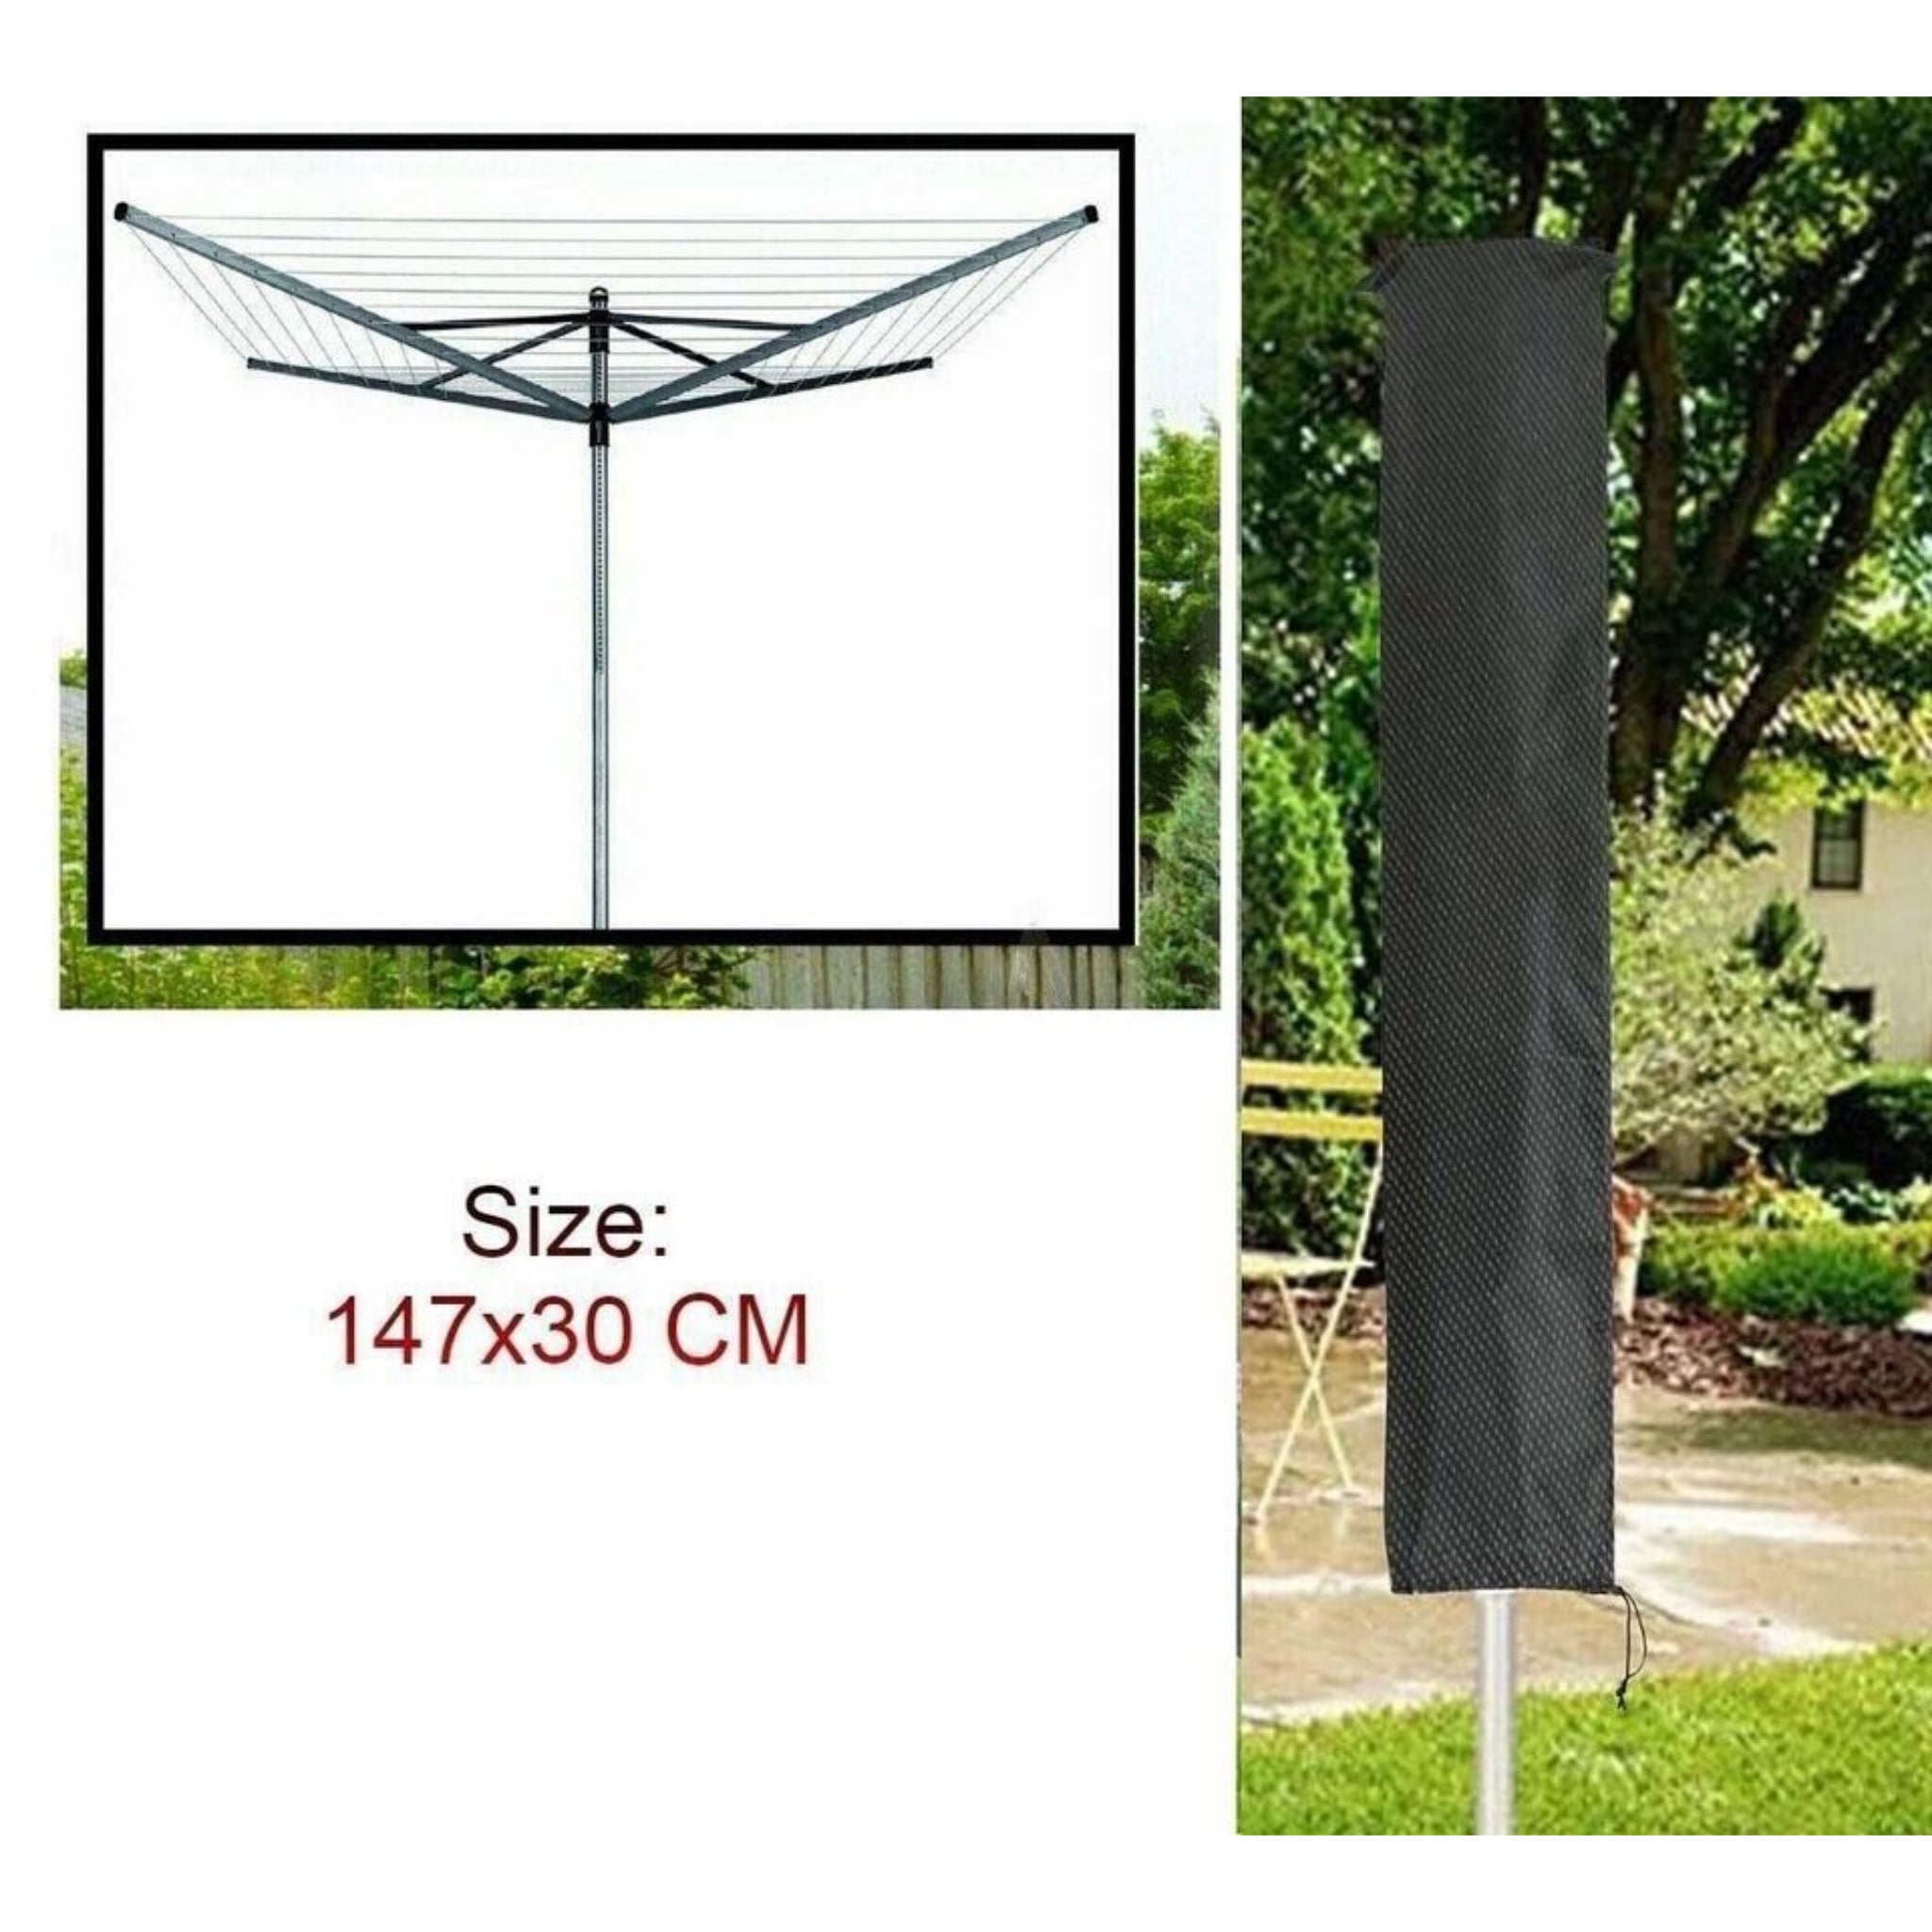 Beclen Harp Waterproof Heavy Duty Rotary Washing Line Cover Clothes Airer Garden Parasol